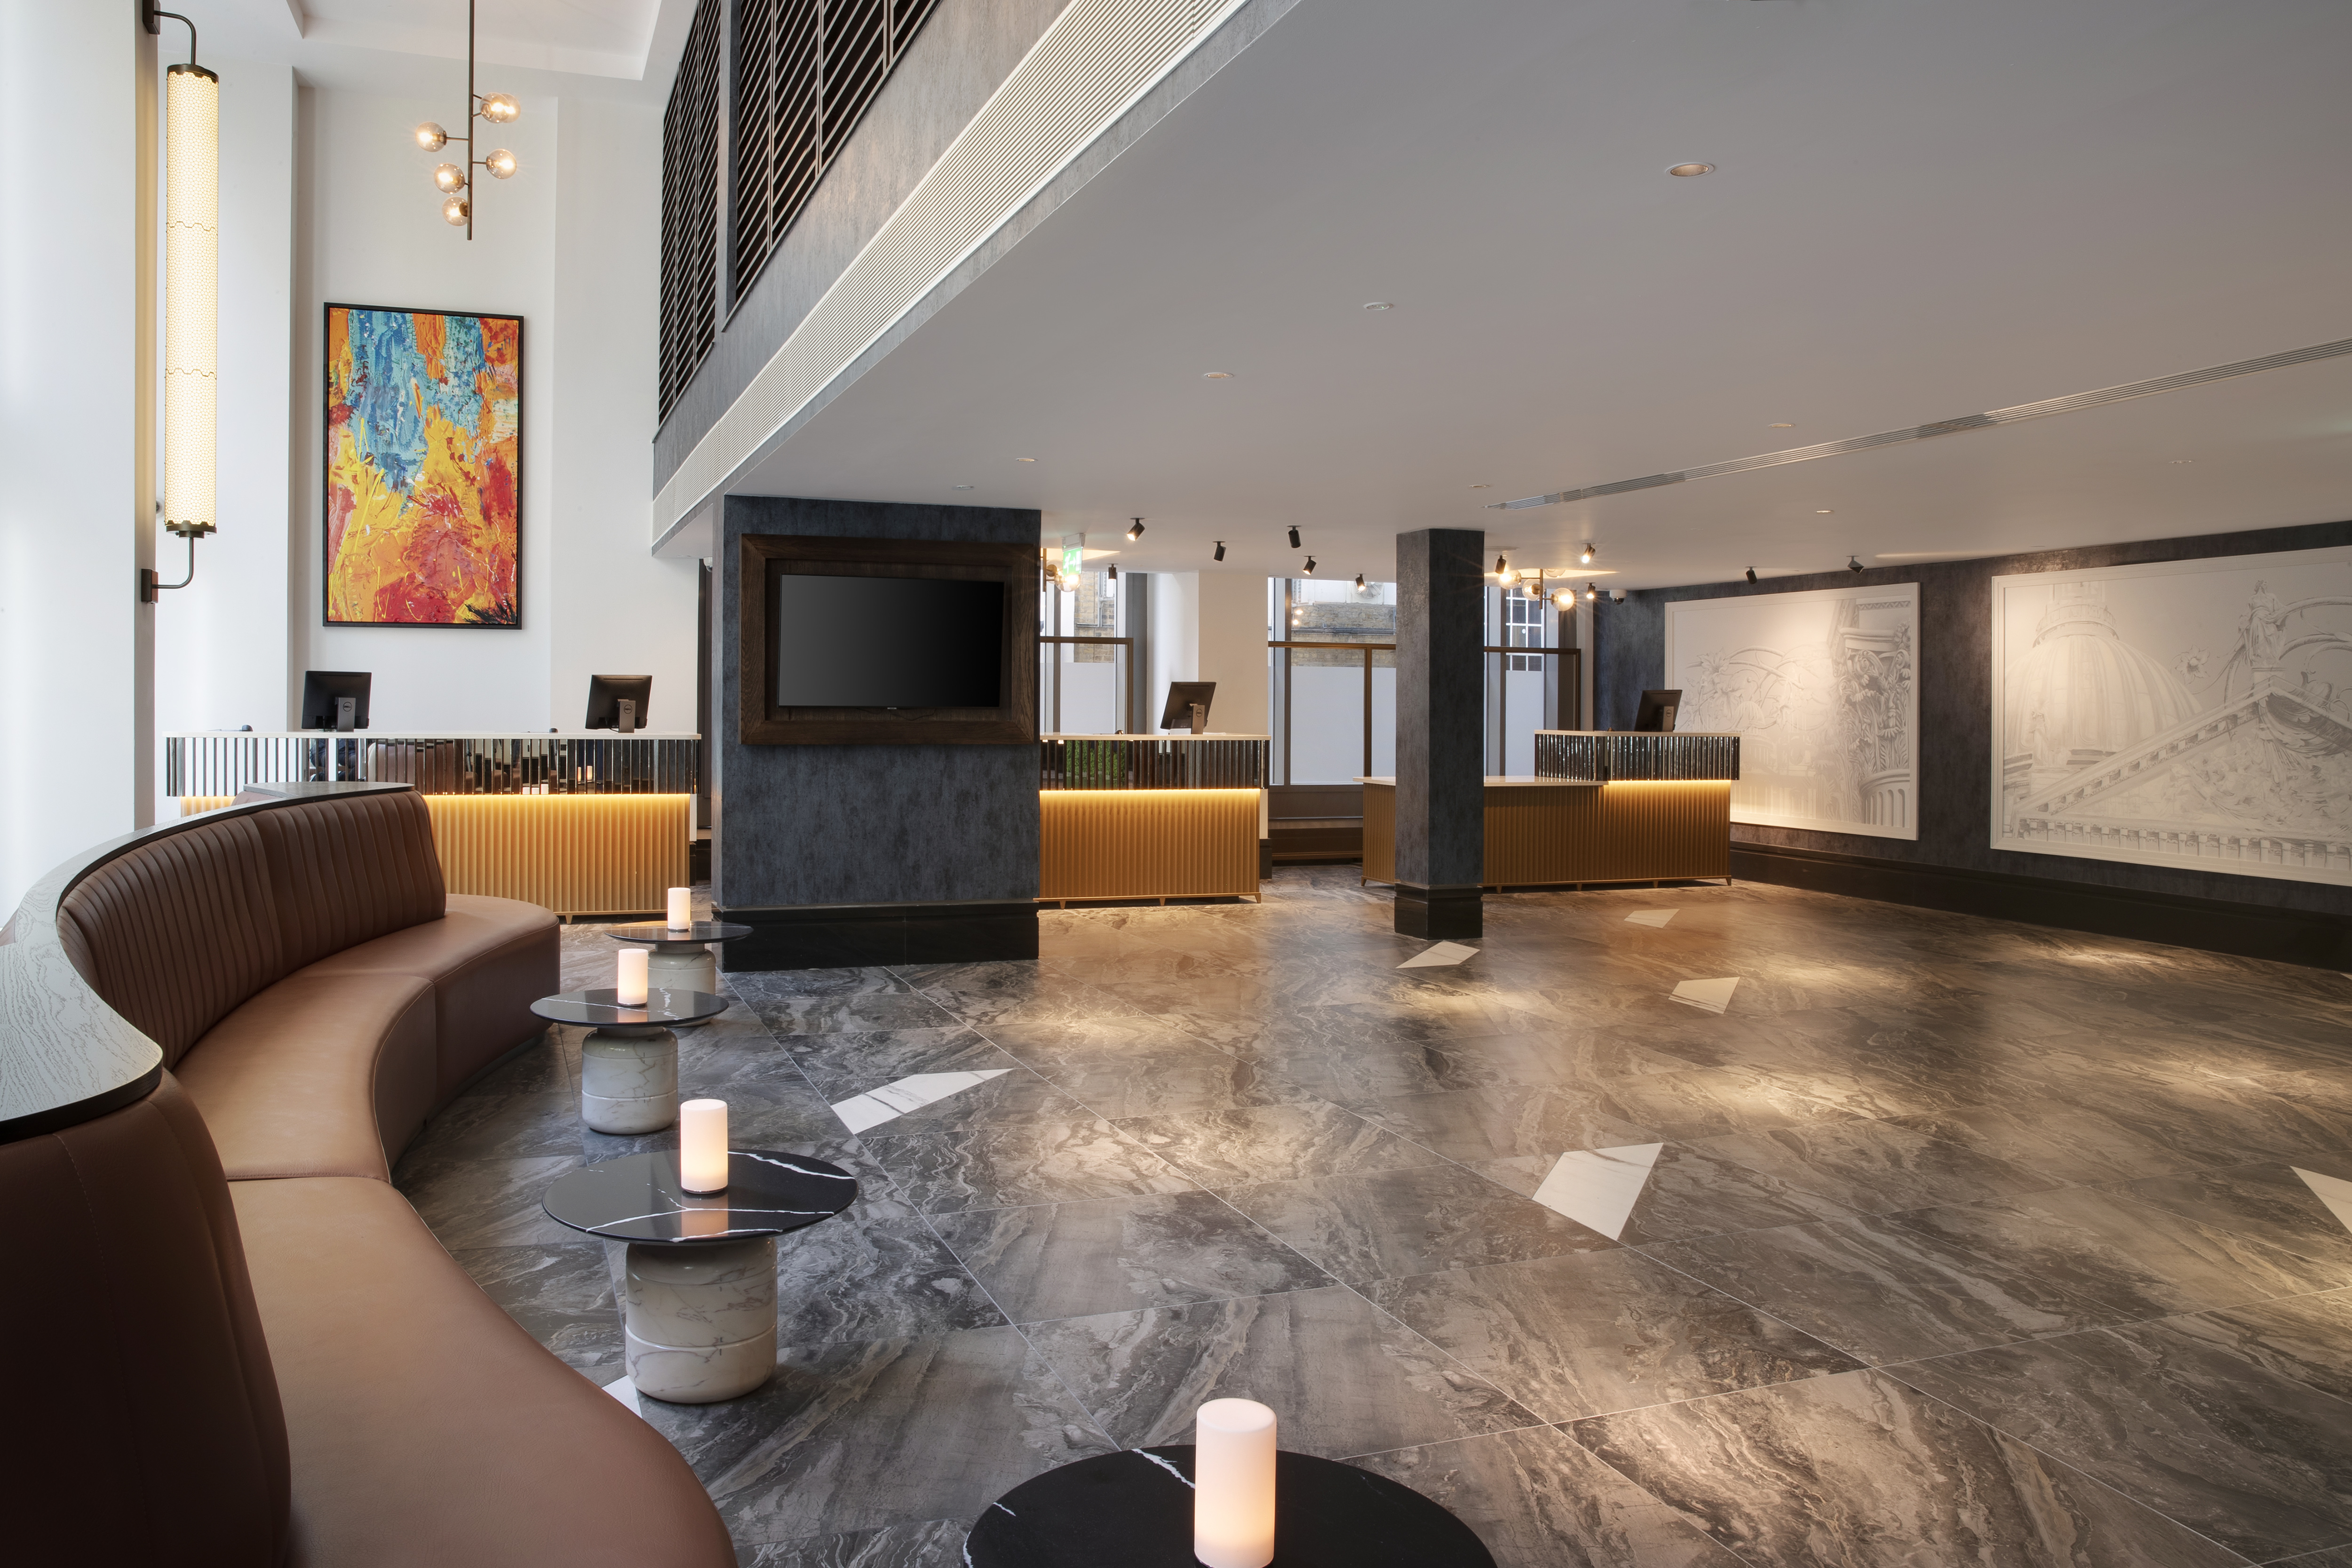 Bespoke Luxury Lighting in This Central London Hotel